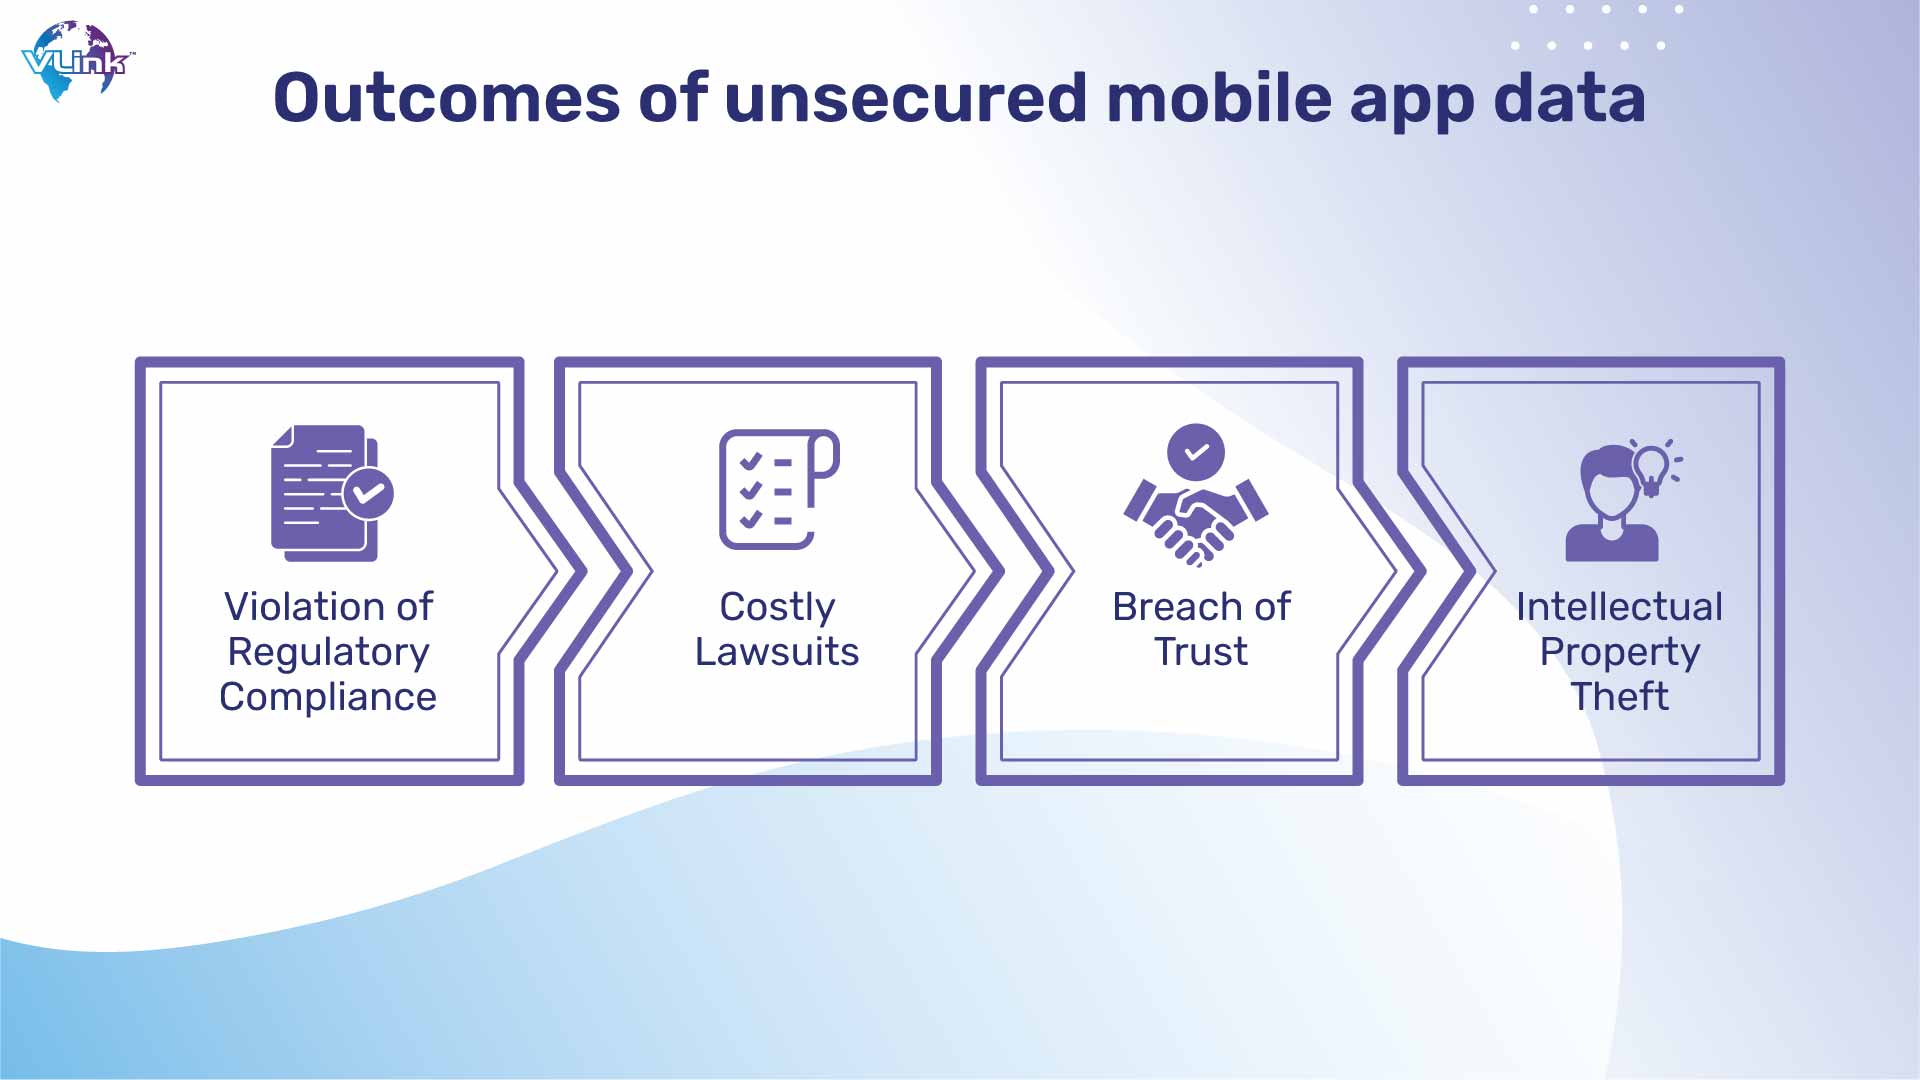 Outcomes of unsecured mobile app data